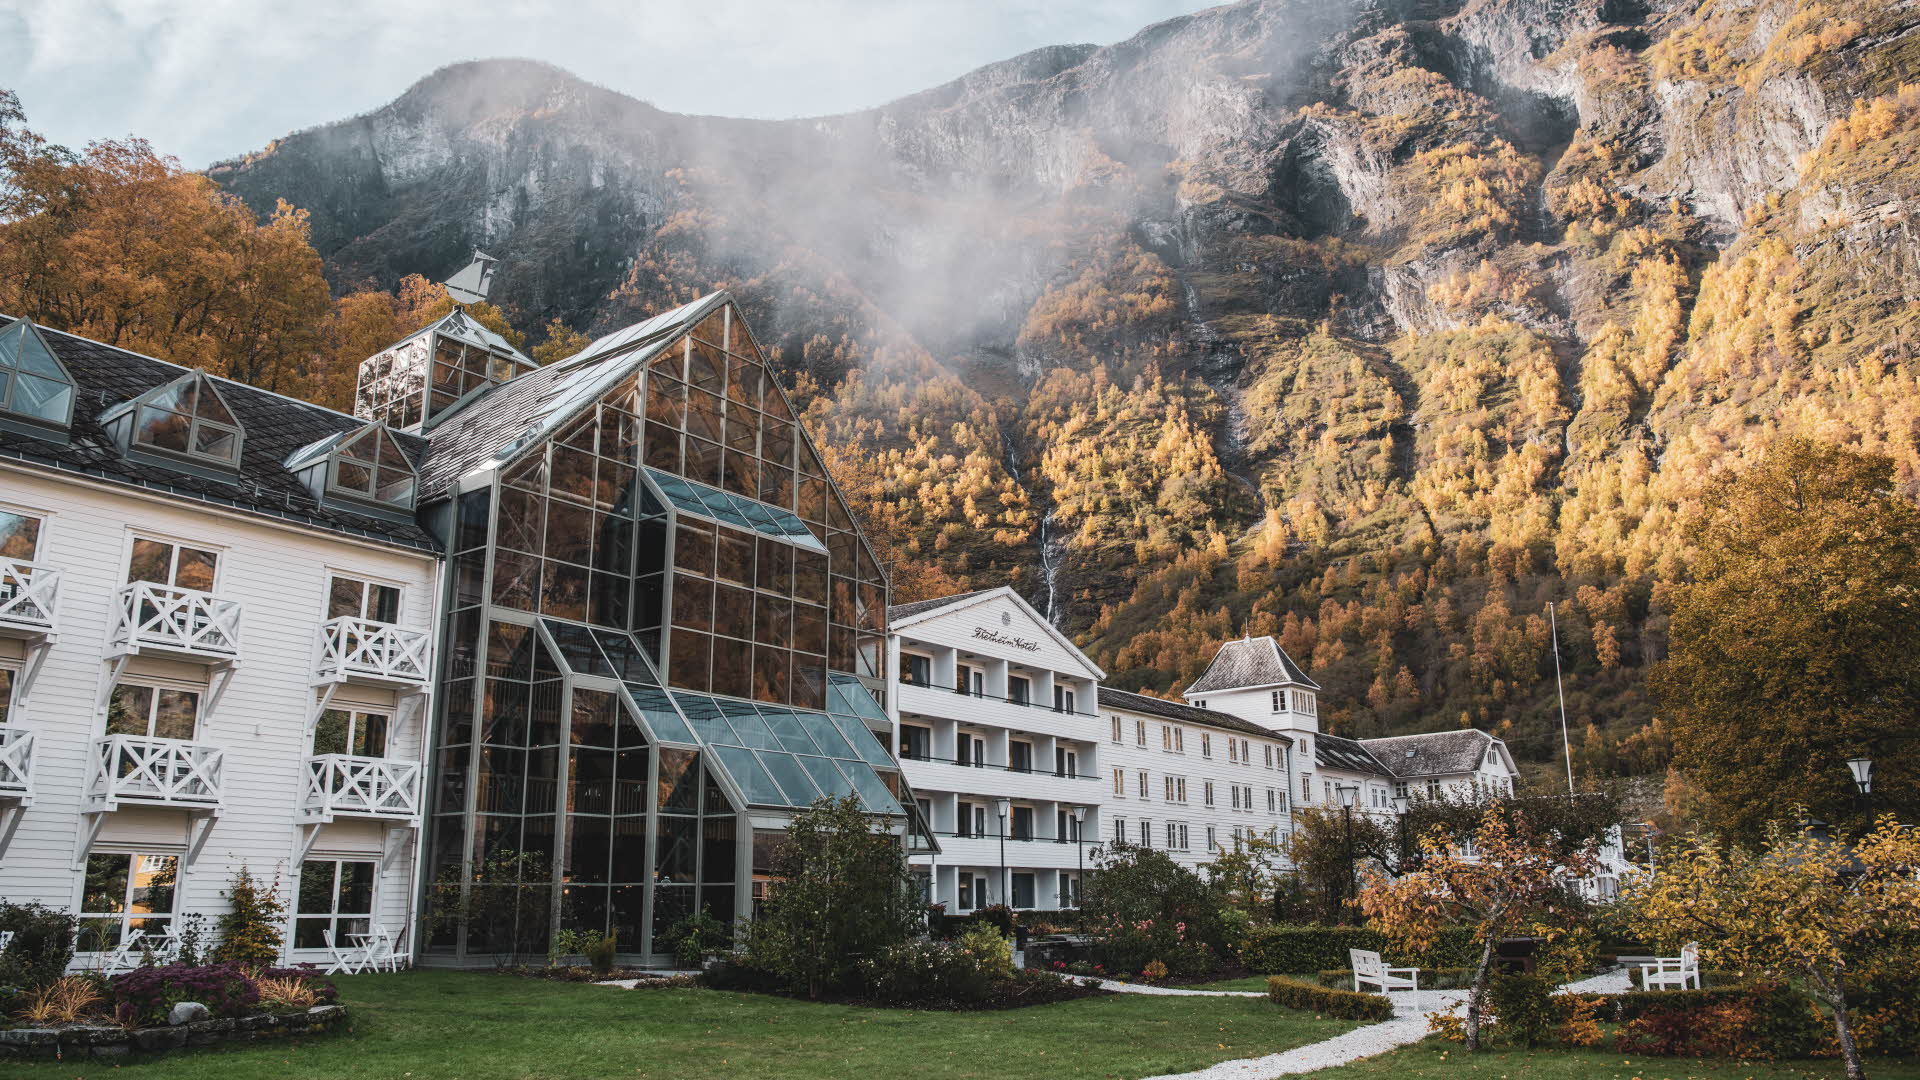 Exterior of Fretheim Hotel in autumn with the steep mountains towering behind